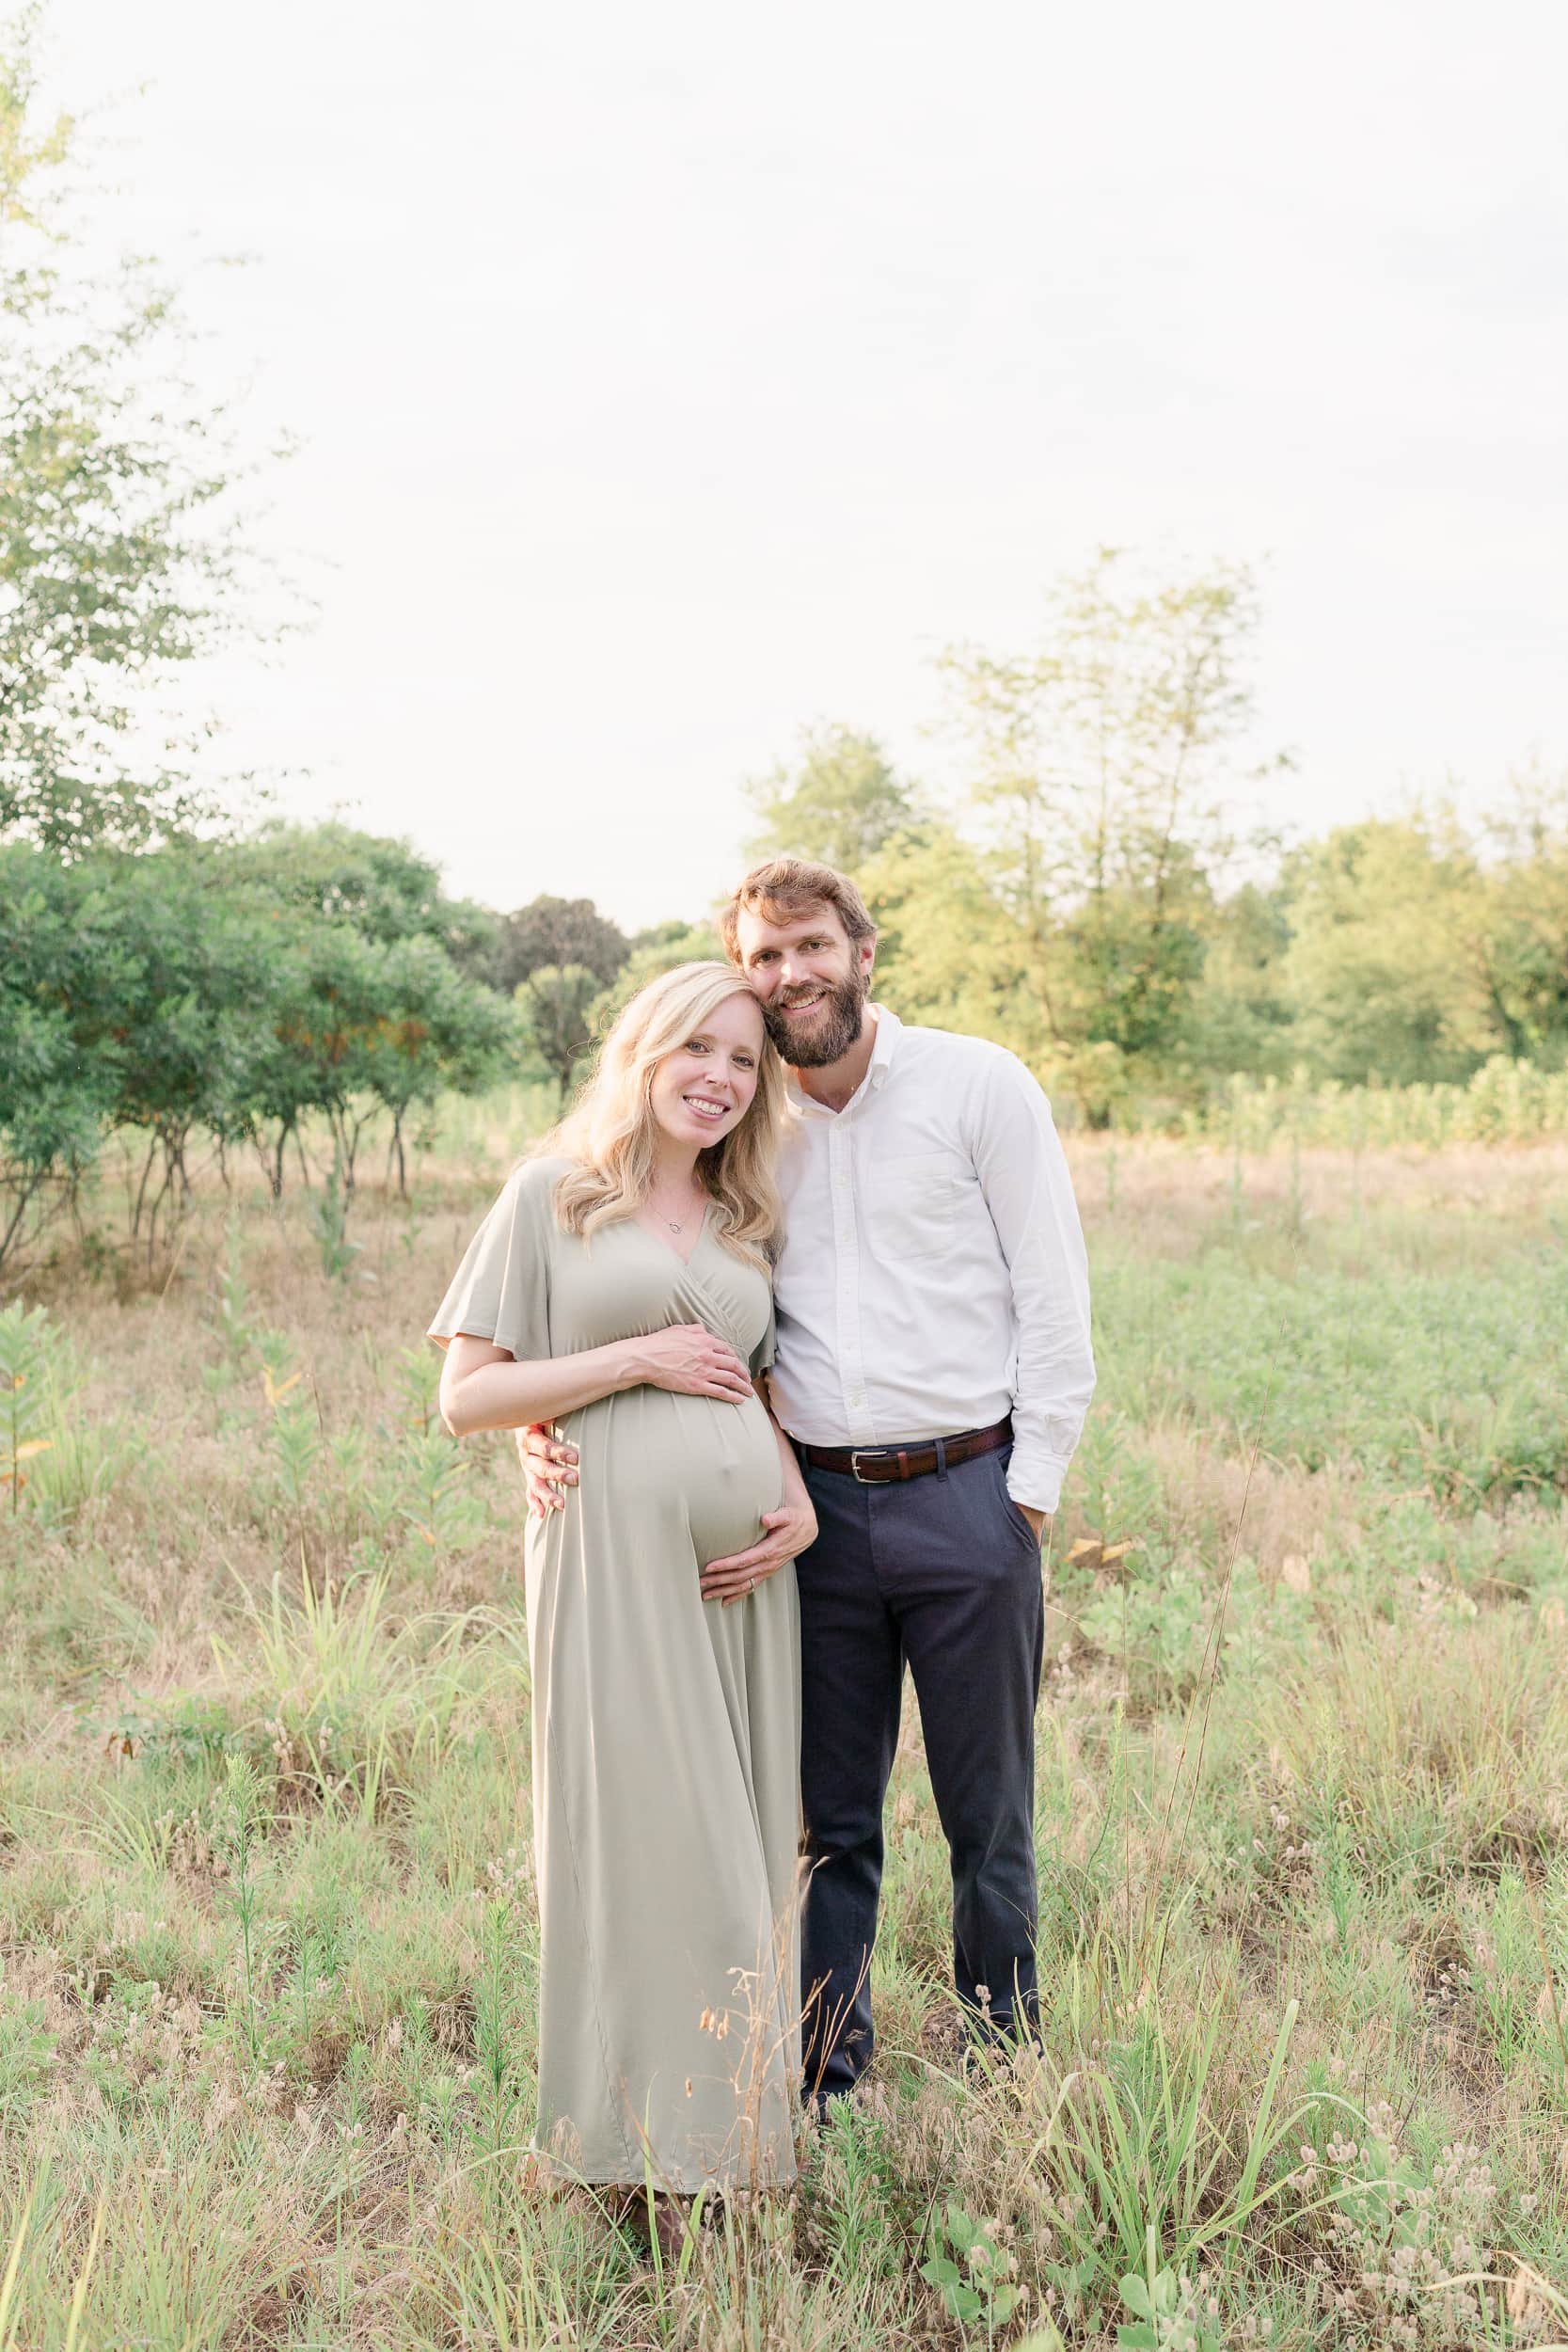 A smiling portrait of a pregnant woman and her husband standing in a field by Moorestown Maternity Photographer Courtney Landrum.